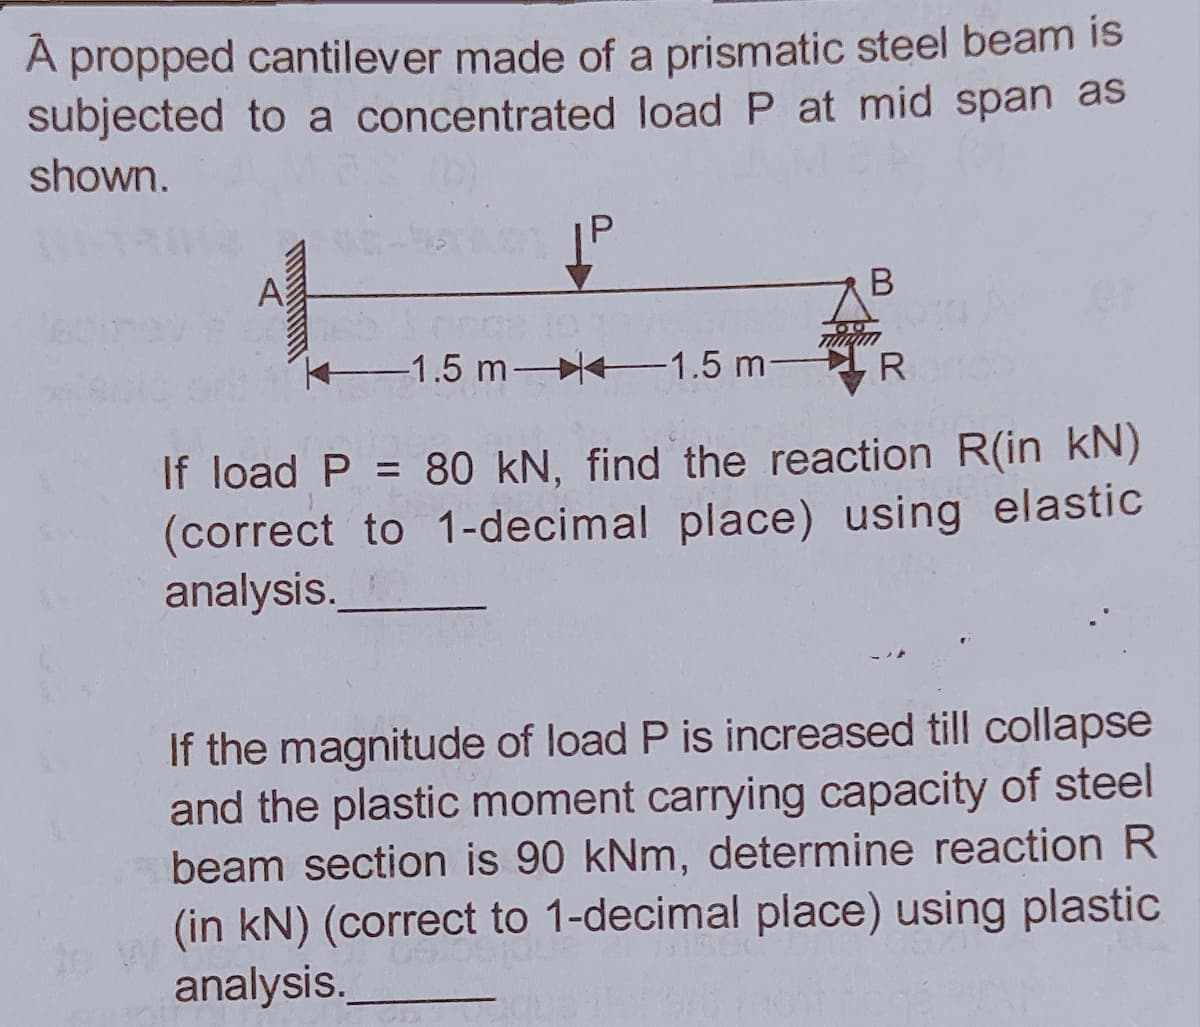 A propped cantilever made of a prismatic steel beam is
subjected to a concentrated load P at mid span as
shown.
A
K1.5 m- 1.5 m-IR
If load P = 80 kN, find the reaction R(in kN)
(correct to 1-decimal place) using elastic
analysis.
%3D
If the magnitude of load P is increased till collapse
and the plastic moment carrying capacity of steel
beam section is 90 kNm, determine reaction R
(in kN) (correct to 1-decimal place) using plastic
analysis.
